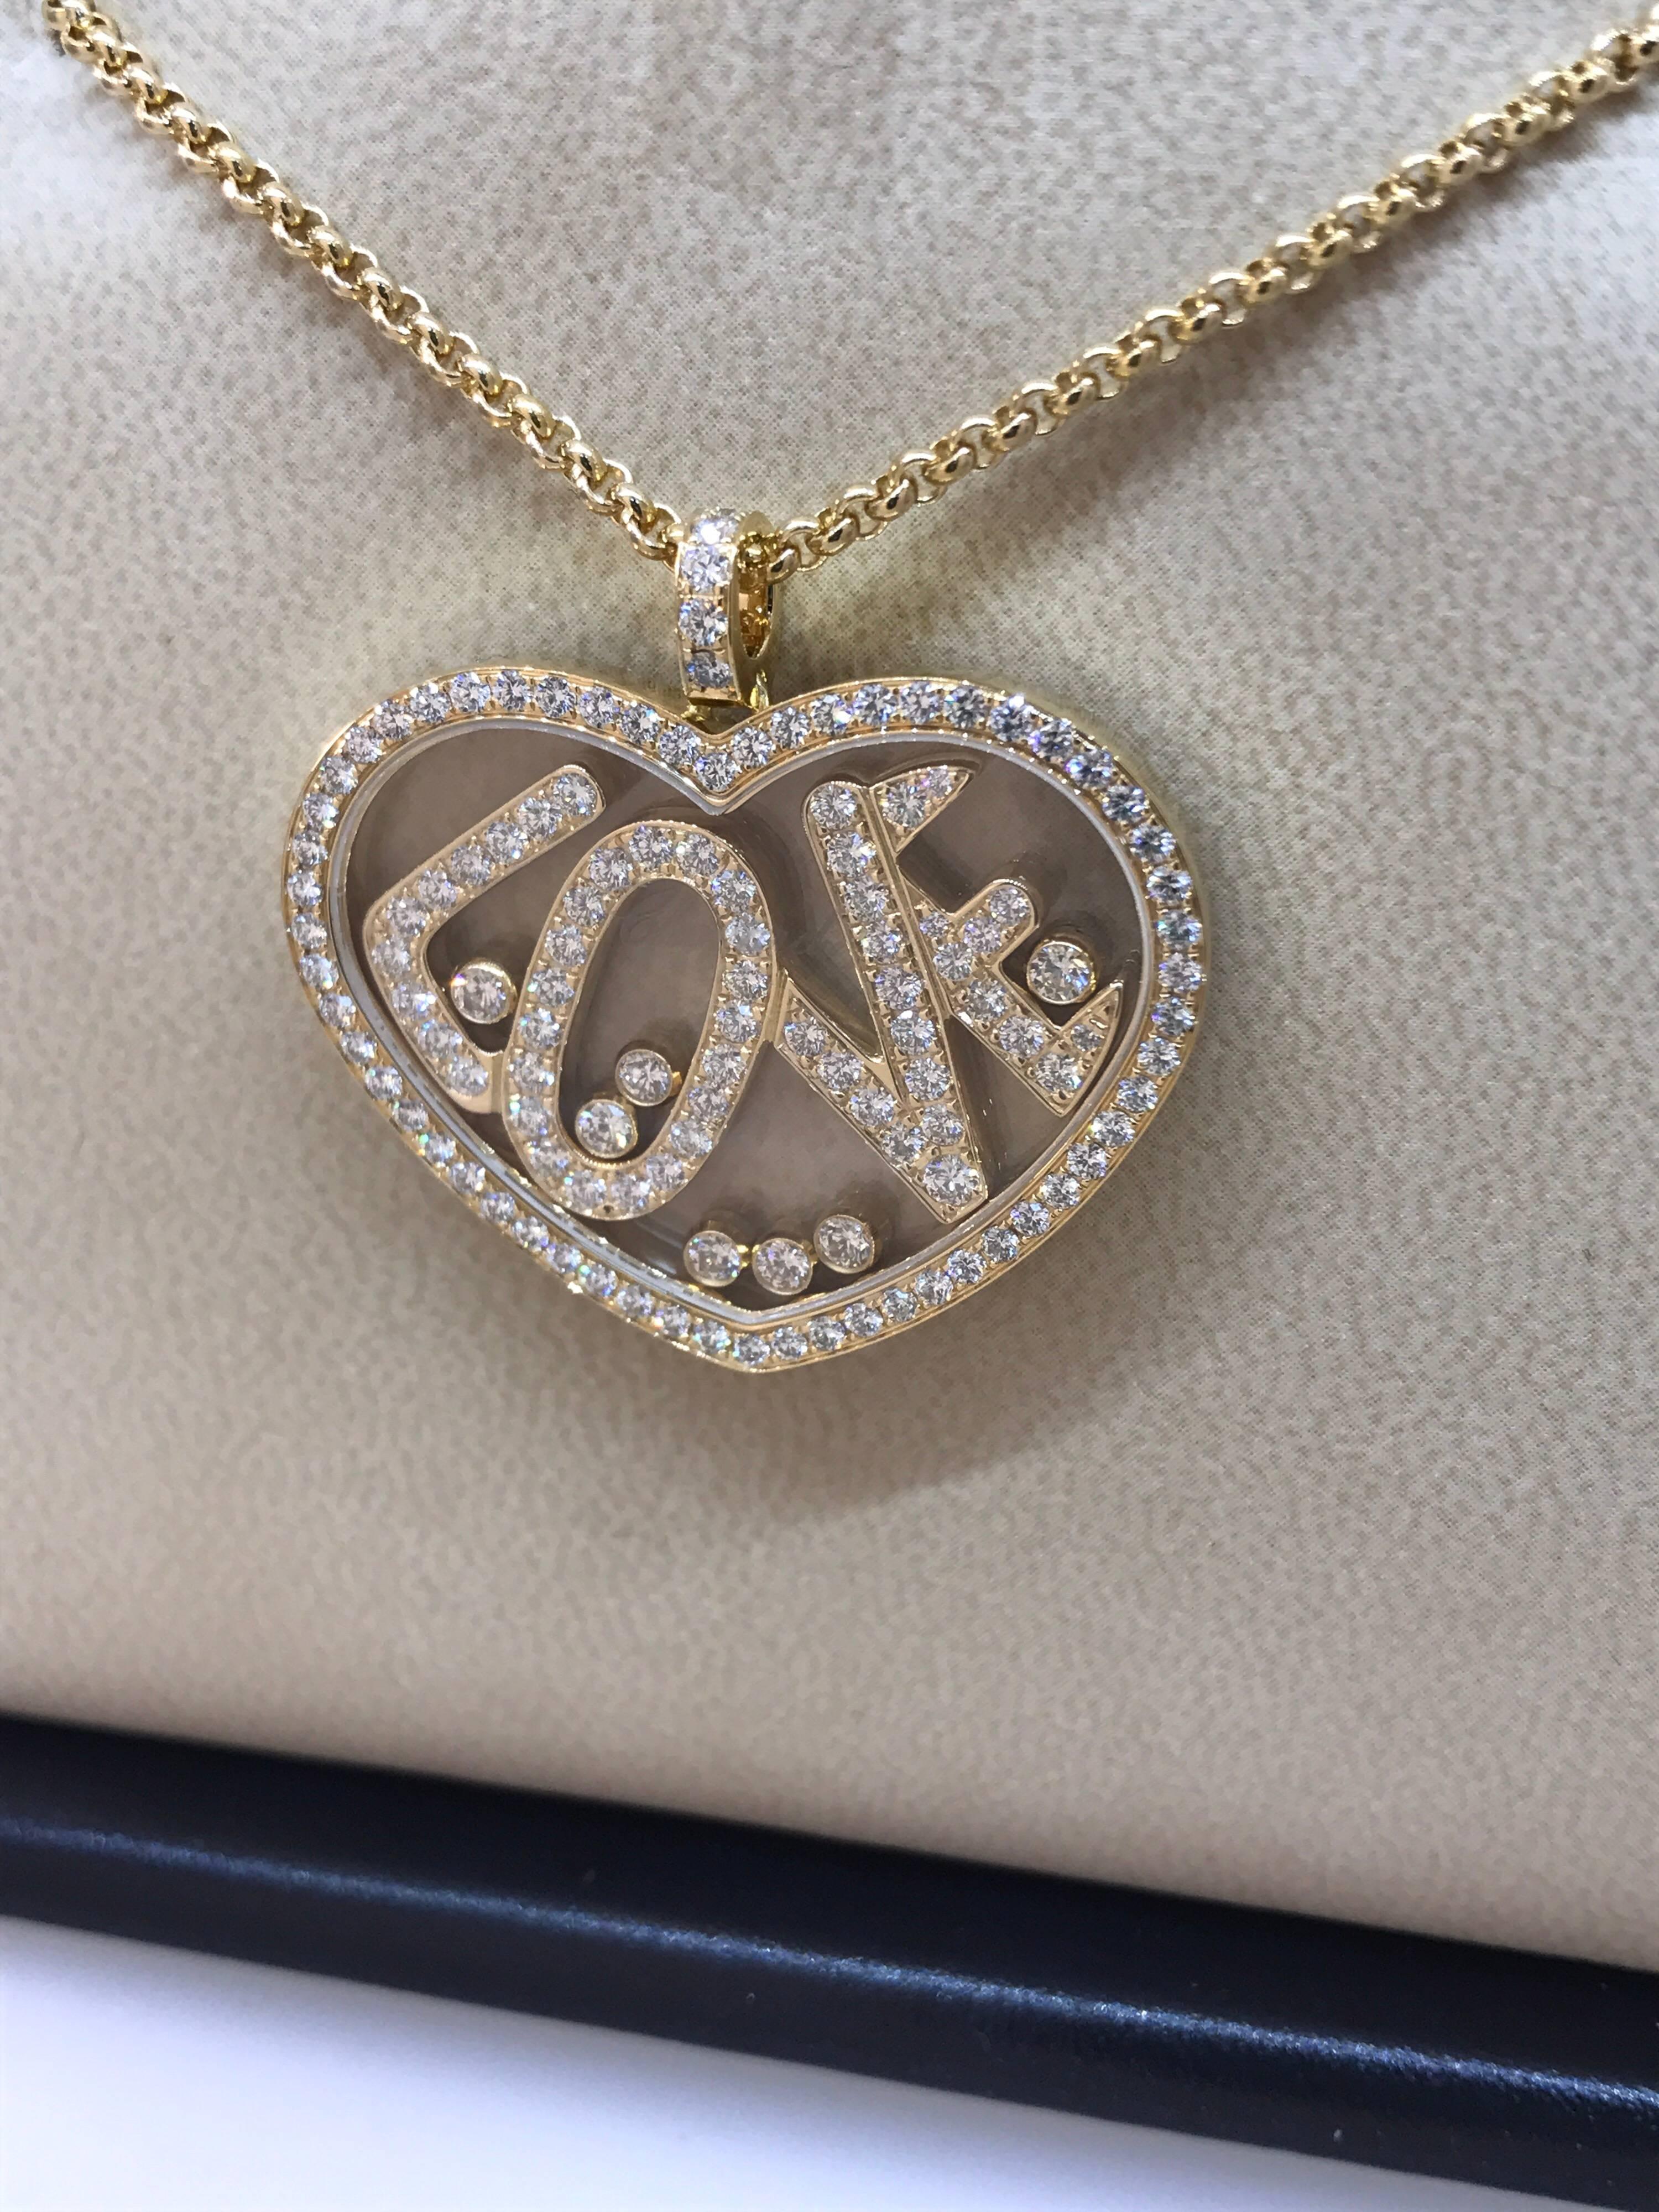 Chopard Happy Diamonds Heart Pendant / Necklace

Model Number: 79/7225-1003

100% Authentic

Brand New

Comes with original Chopard box, certificate of authenticity and warranty, and jewels manual

18 Karat Yellow Gold (25.10gr)

116 Diamonds on the